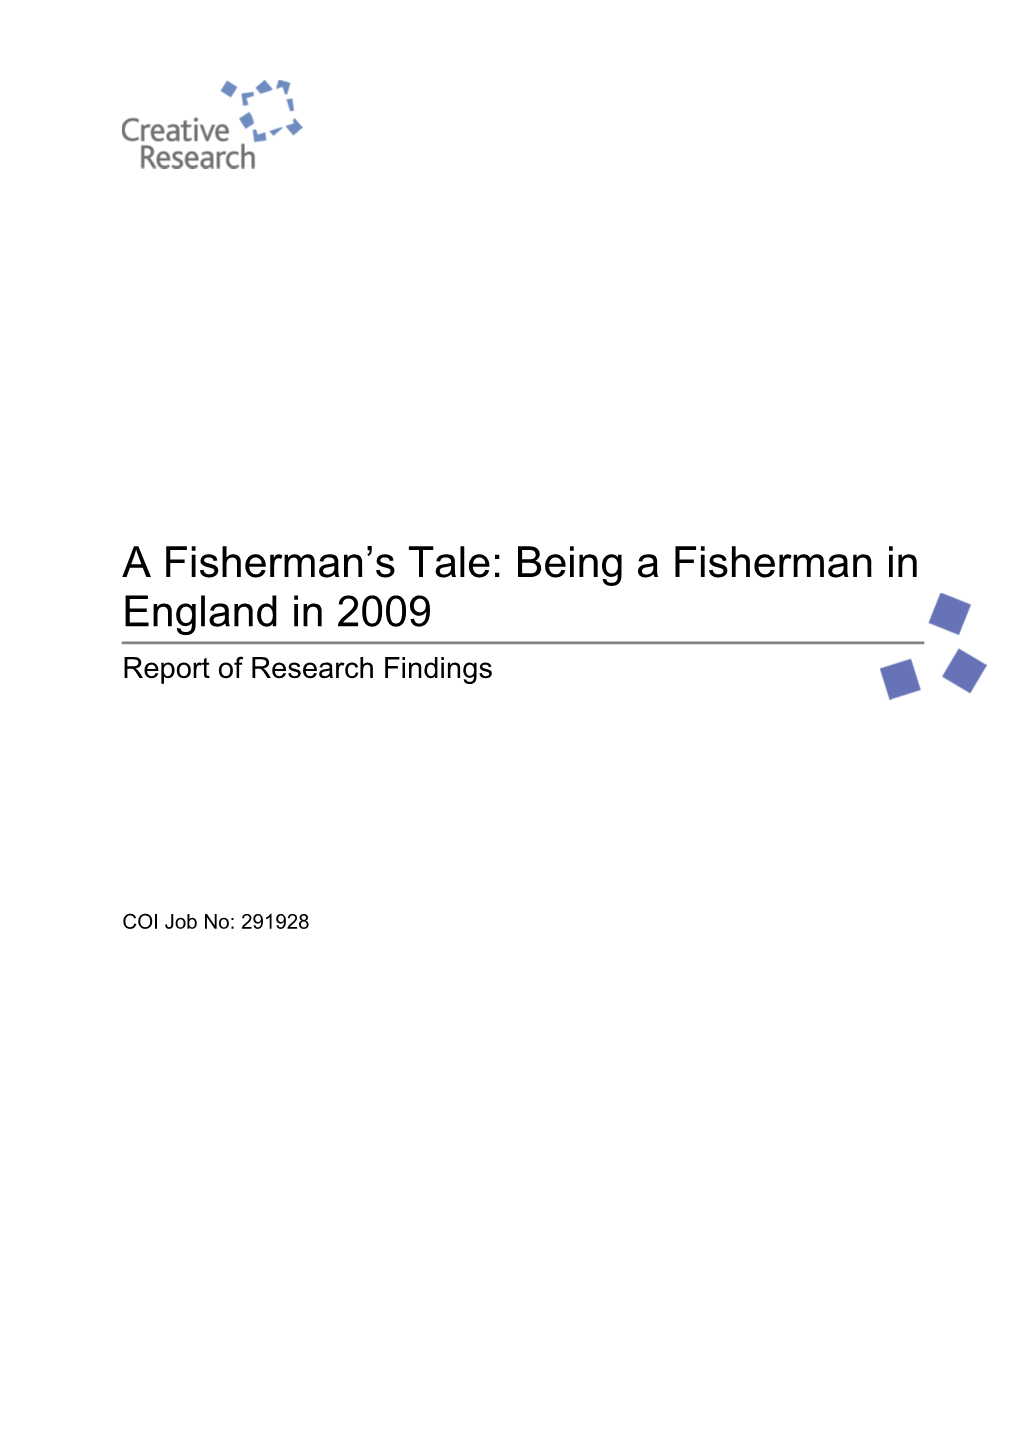 A Fisherman S Tale: Being a Fisherman in England in 2009: Report of Research Findings